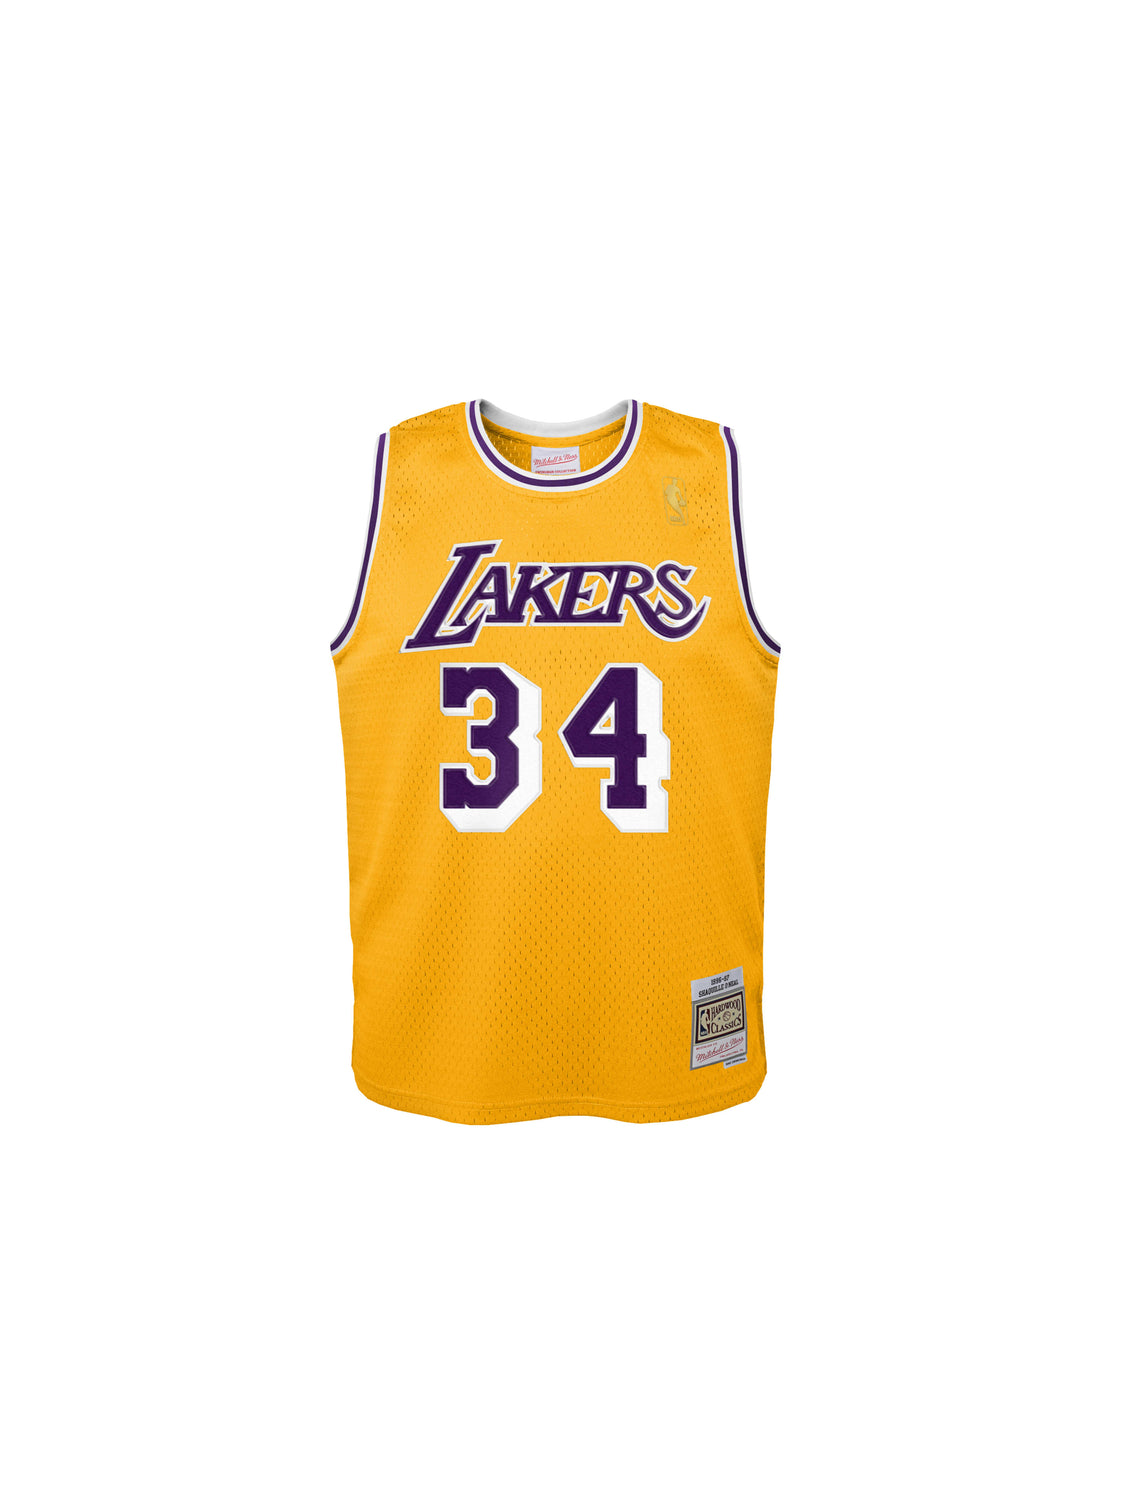 MITCHELL & NESS - M&N NBA SWINGMAN HOME JERSEY LAKERS 96 SHAQUILLE